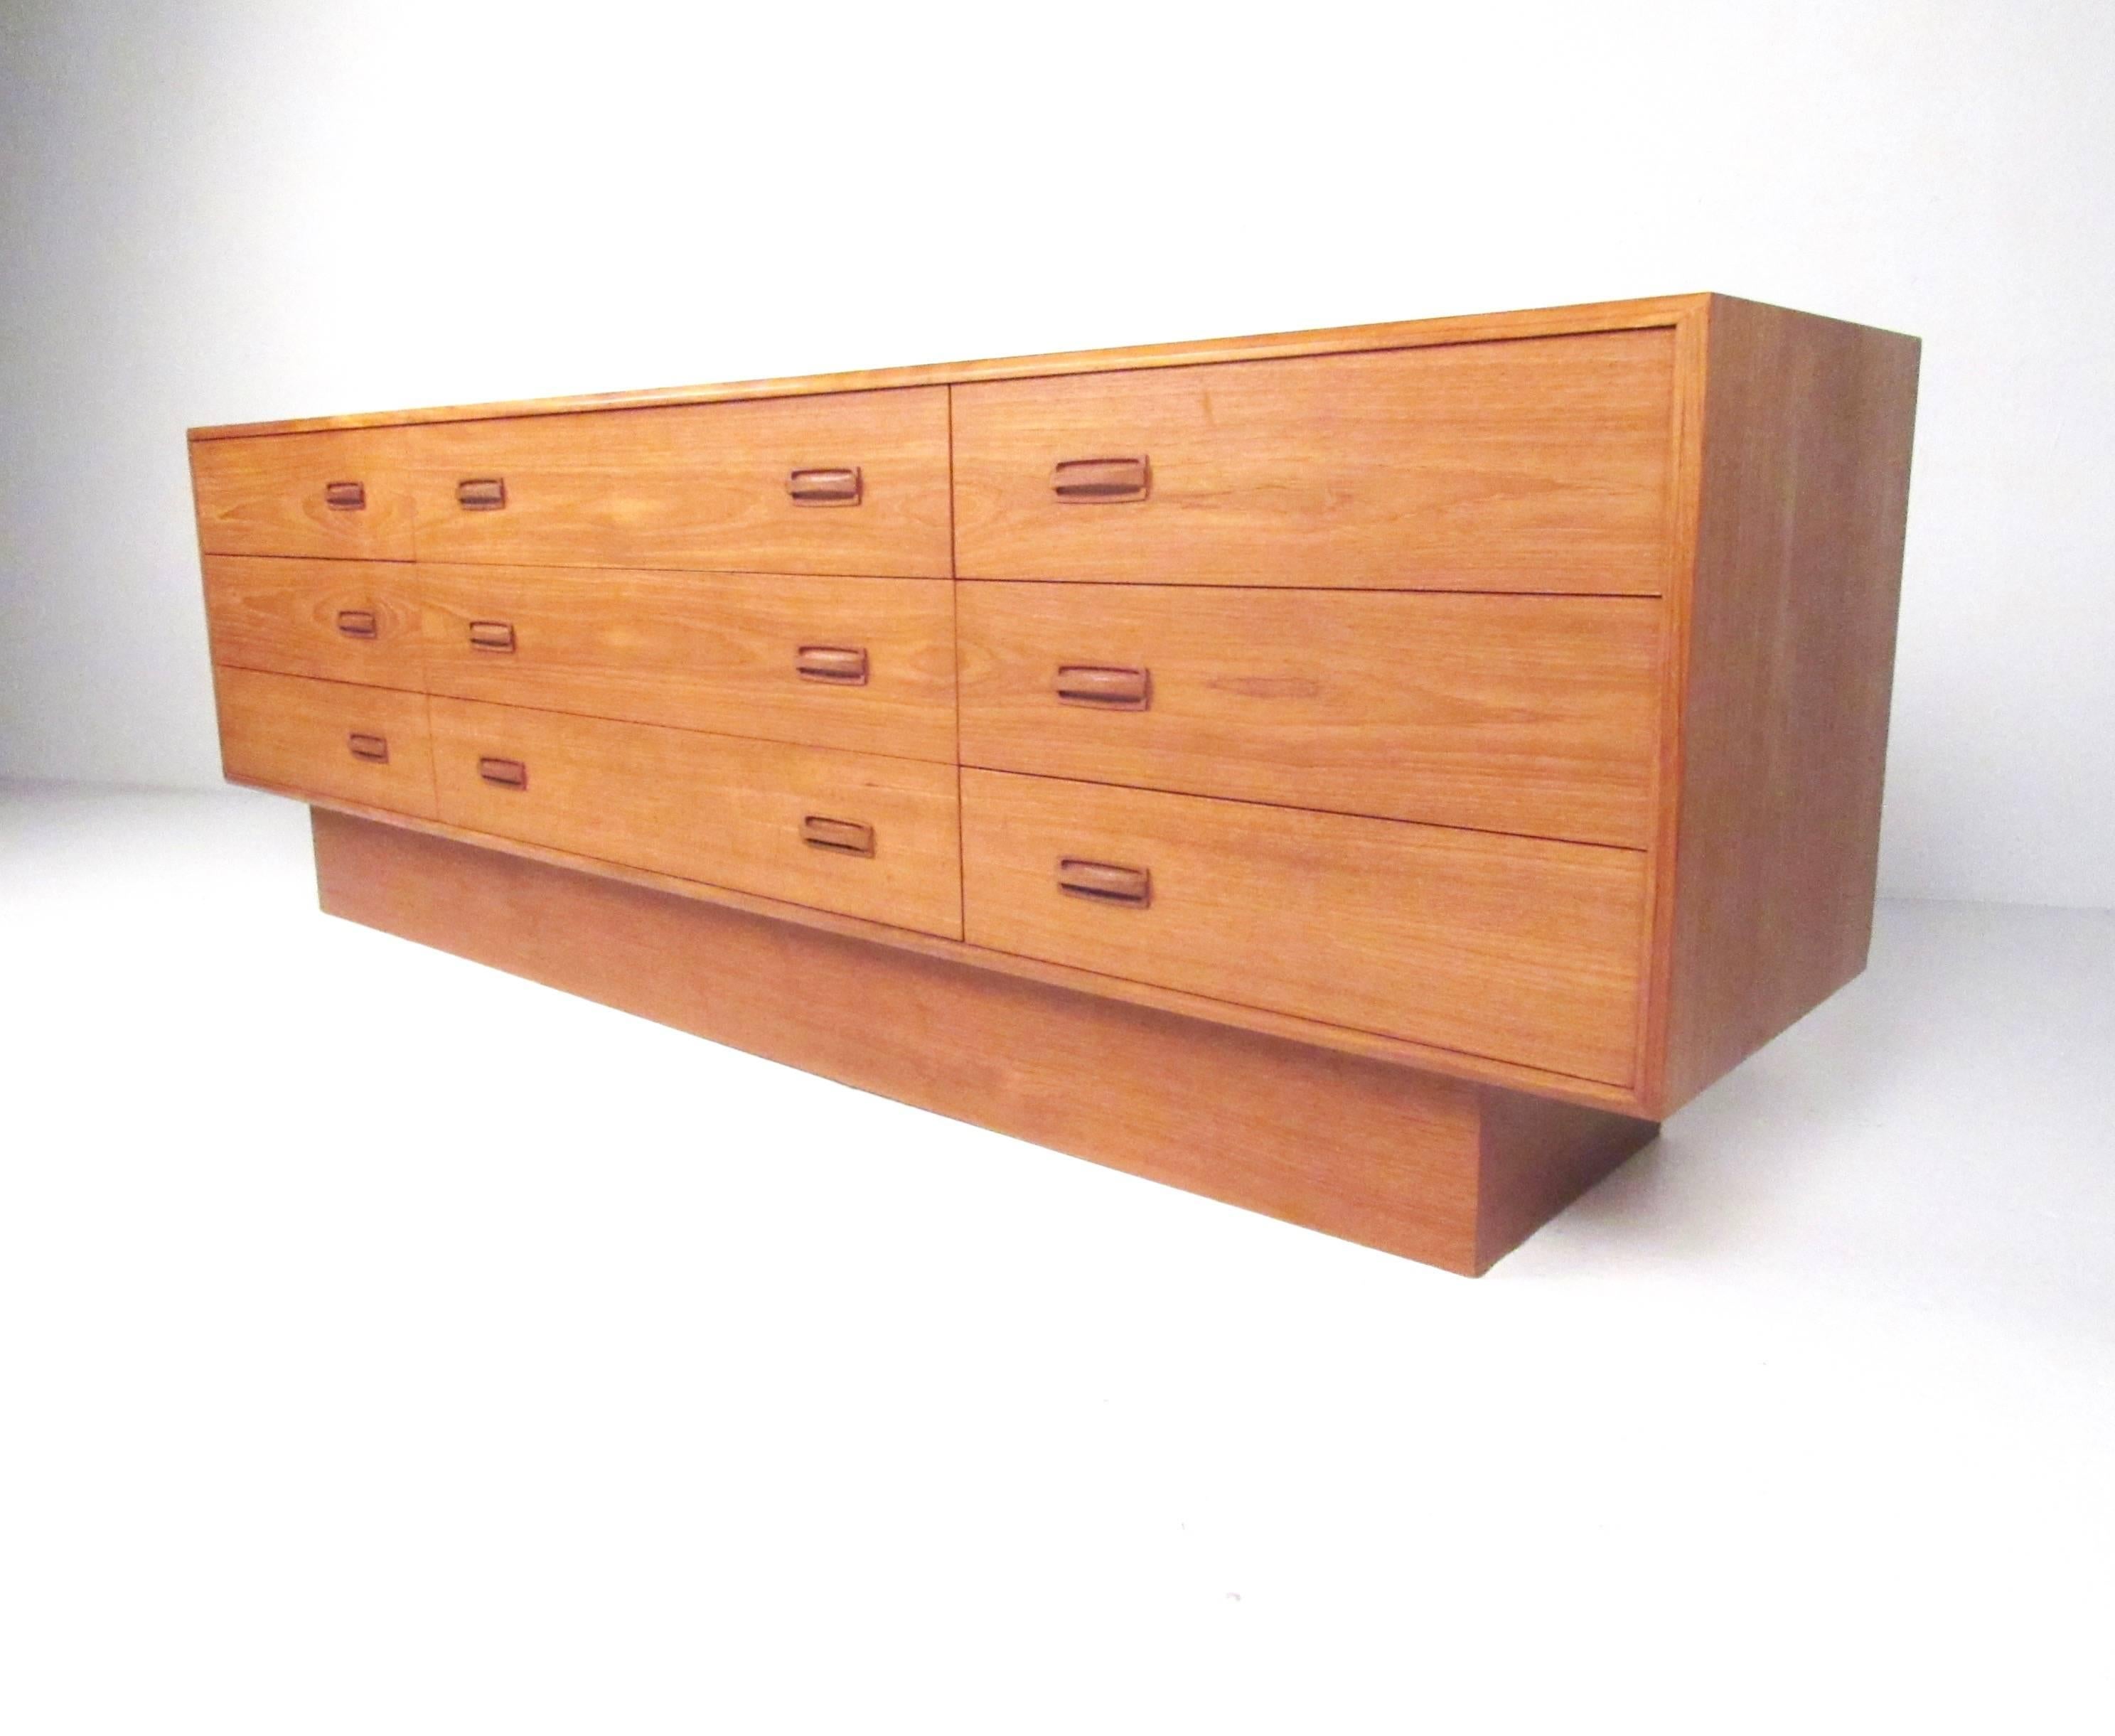 This stylish bedroom dresser features nine spacious drawers with matched teak veneer finish and well crafted carved pulls. The unique Scandinavian modern style of this Canadian piece makes this an impressive storage piece in any setting. Please